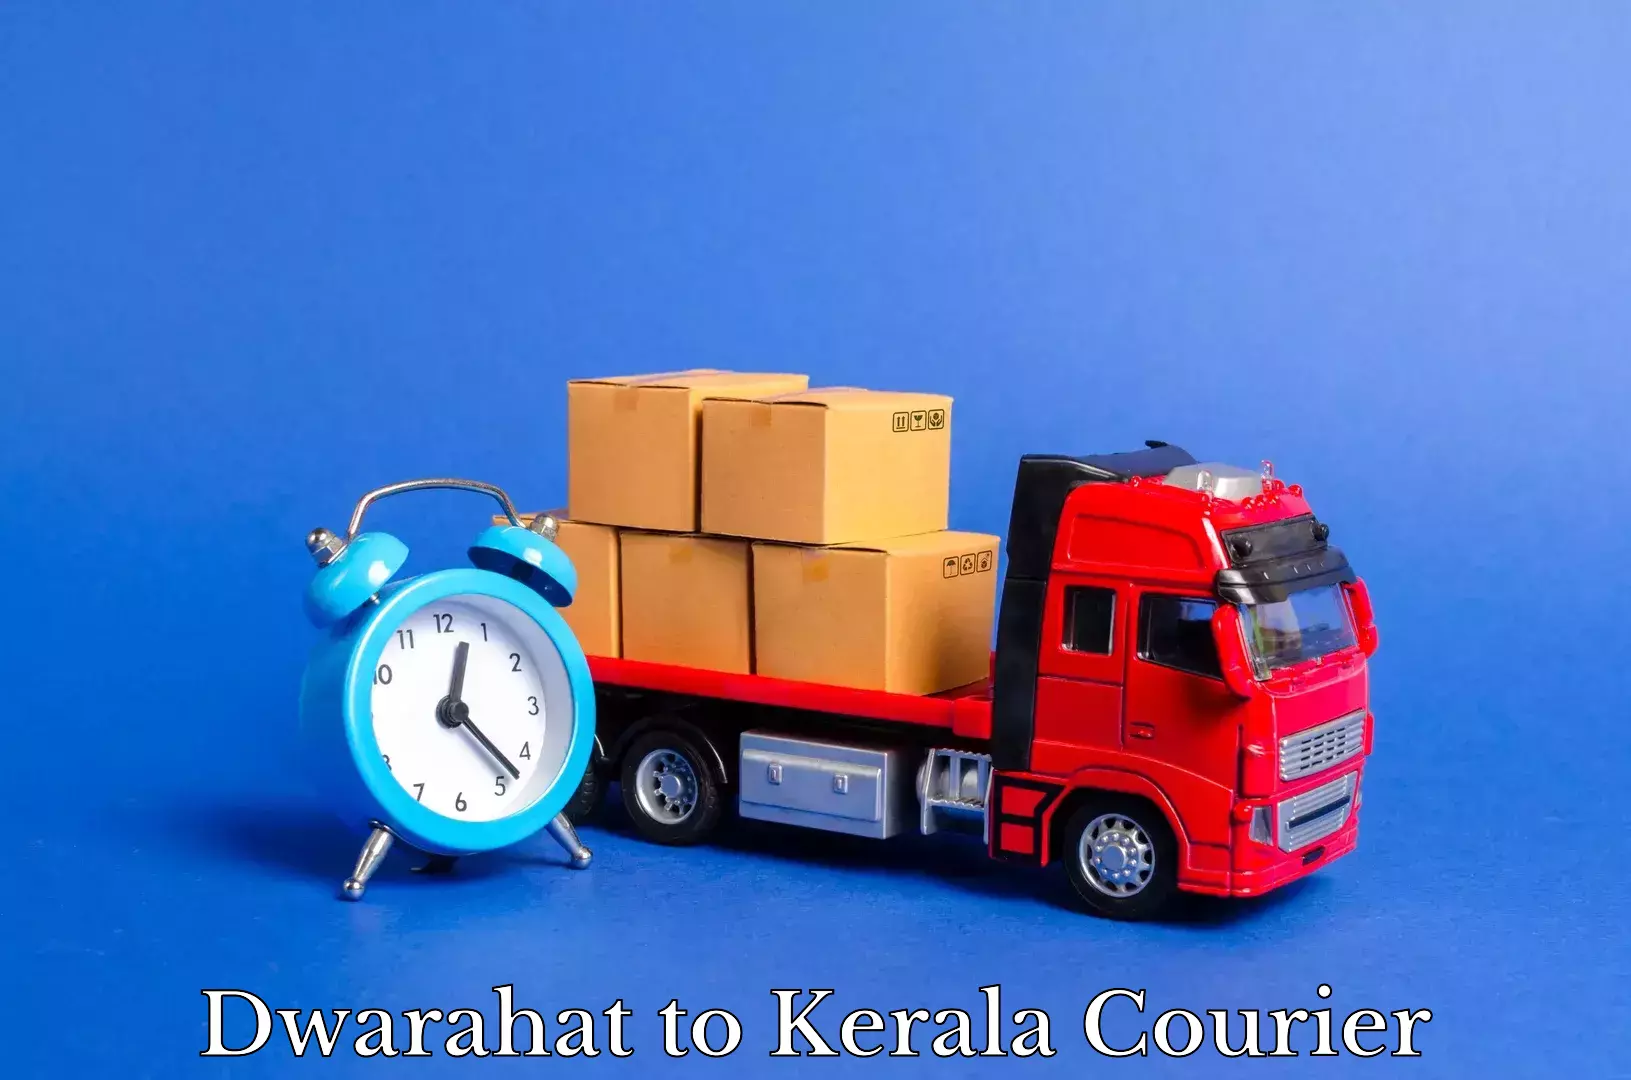 Home moving specialists Dwarahat to Kozhikode